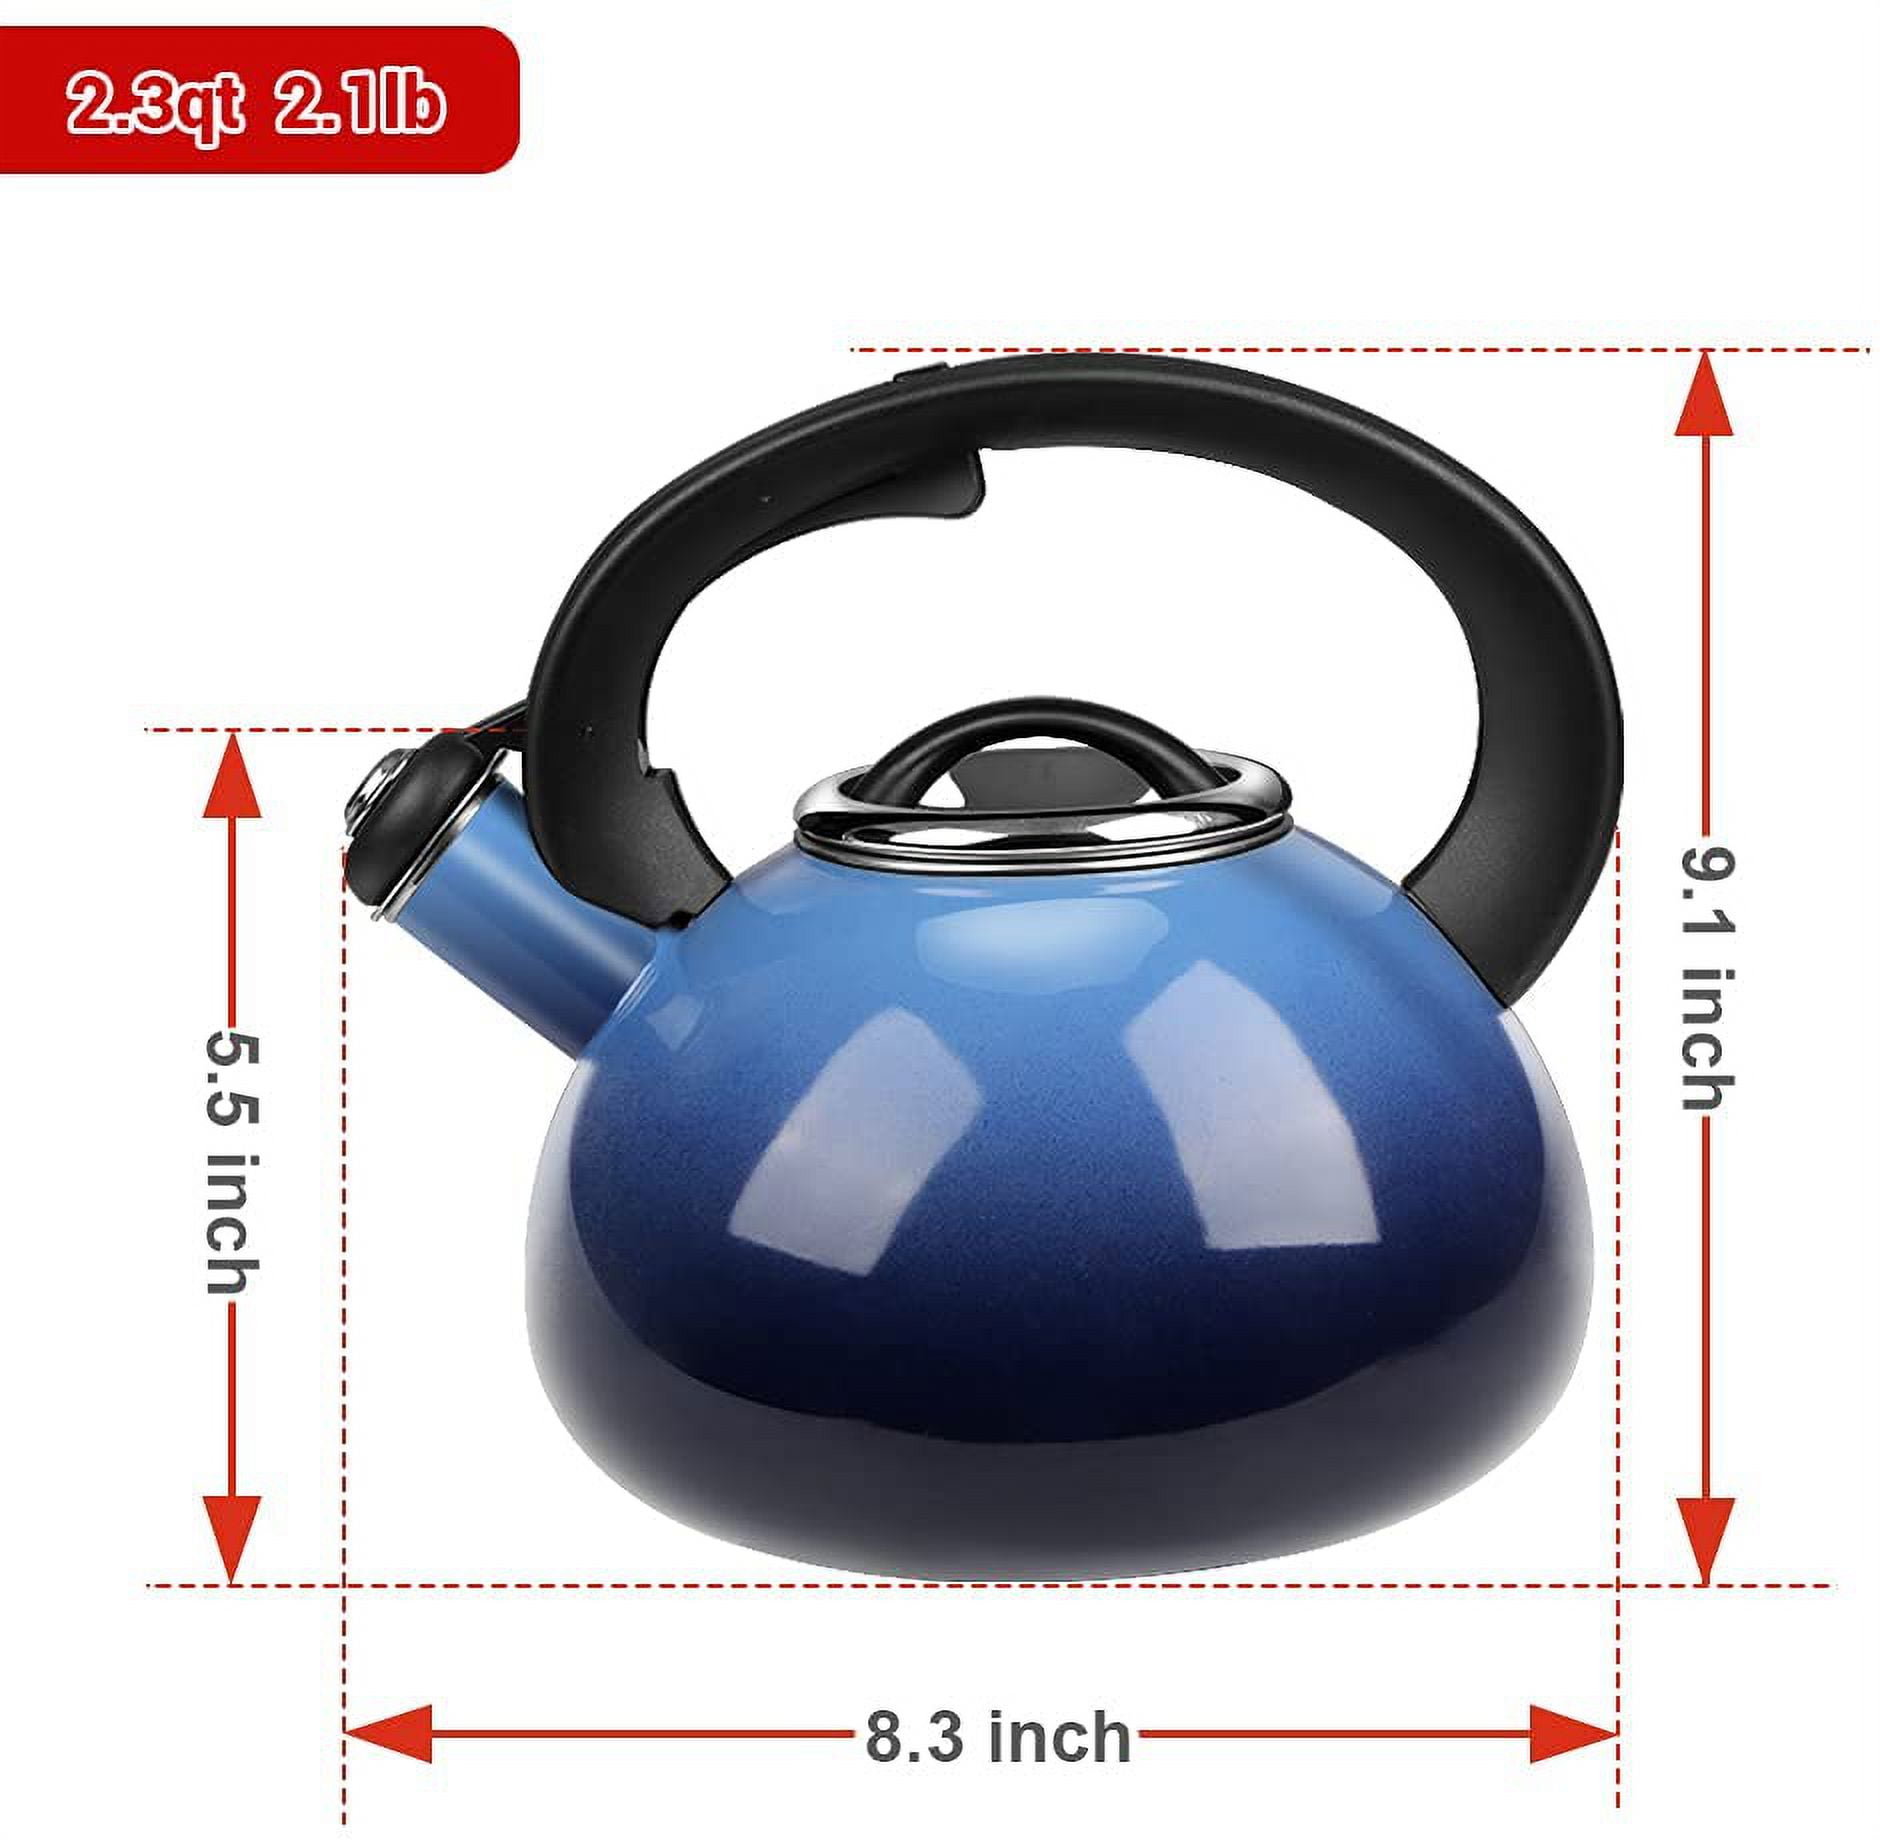  Tea kettle, Orange Whistling Tea Kettle for Stovetop 2.3 Quart  Food Grade Stainless Steel Teapot with Cool Touch Ergonomic Handle: Home &  Kitchen